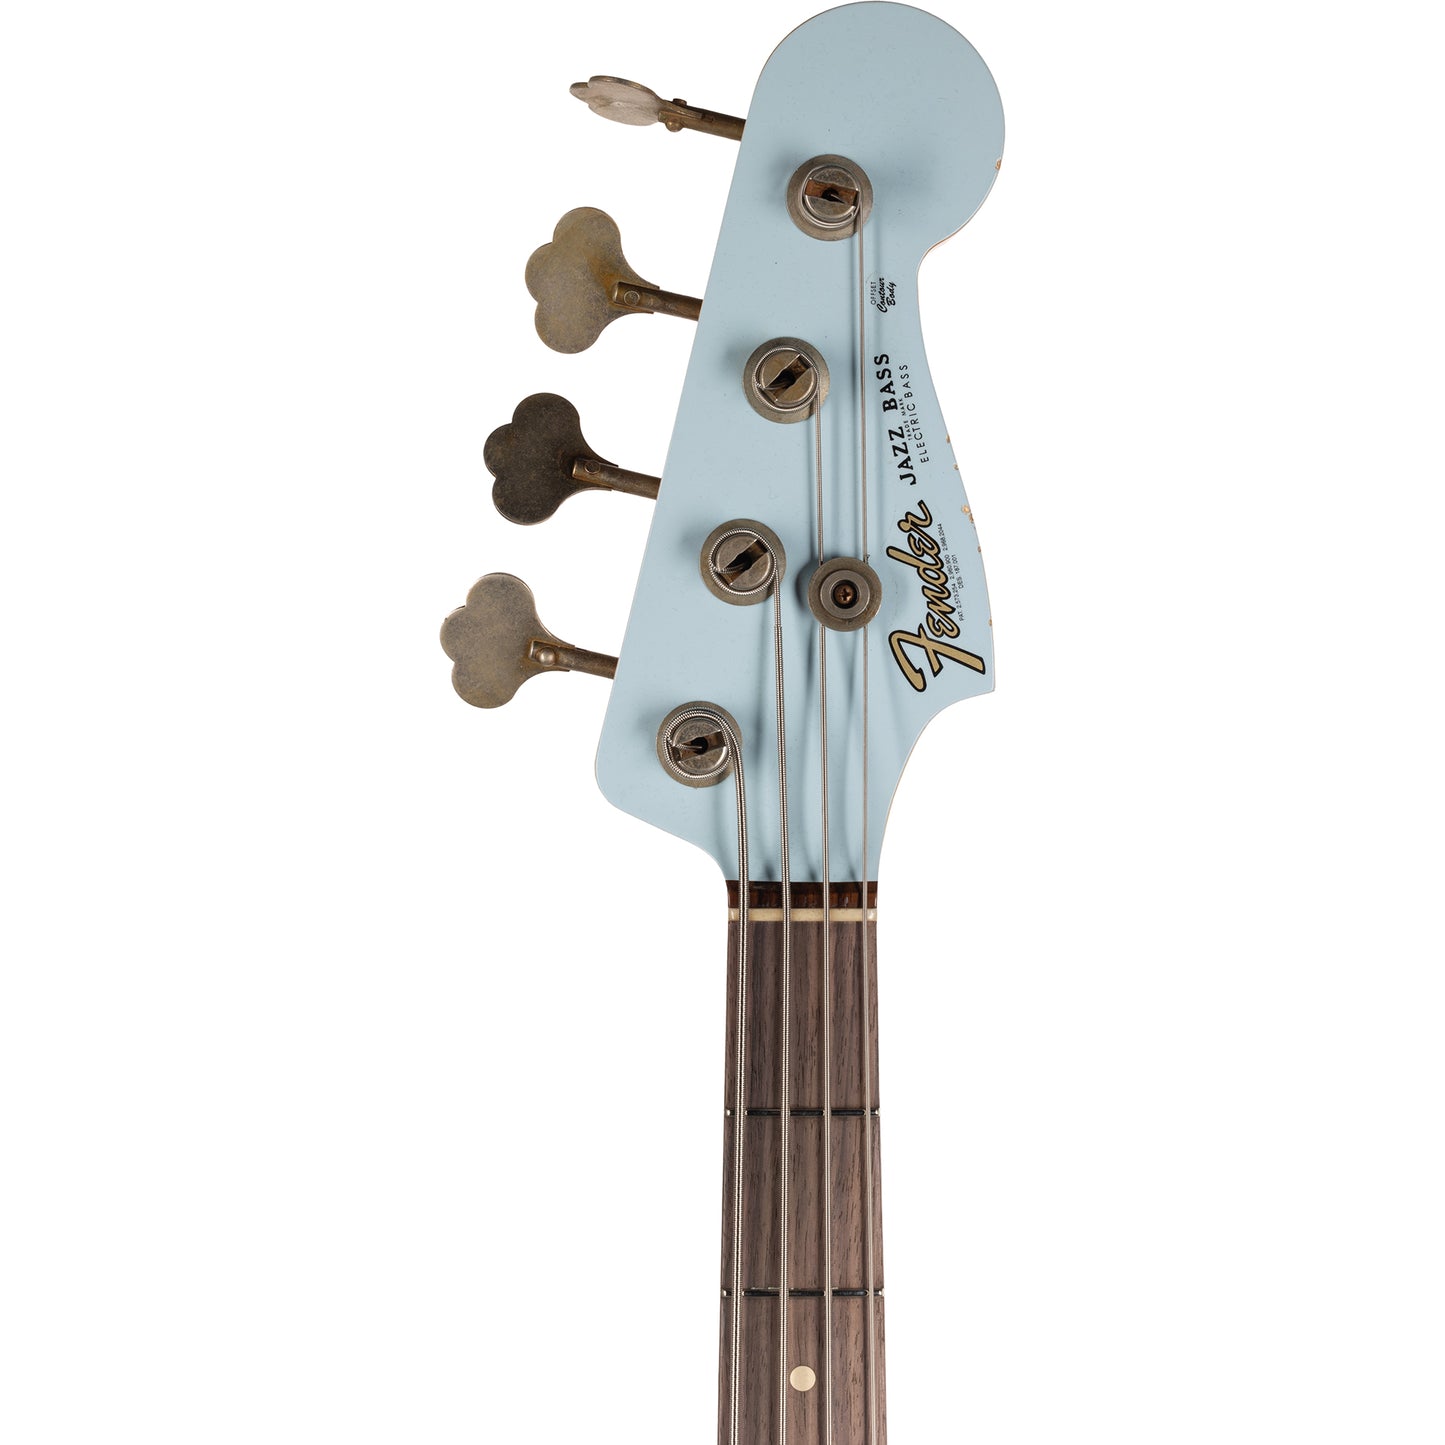 Fender Custom Shop 64 Jazz Bass Guitar Relic with Painted Headcap - Sonic Blue